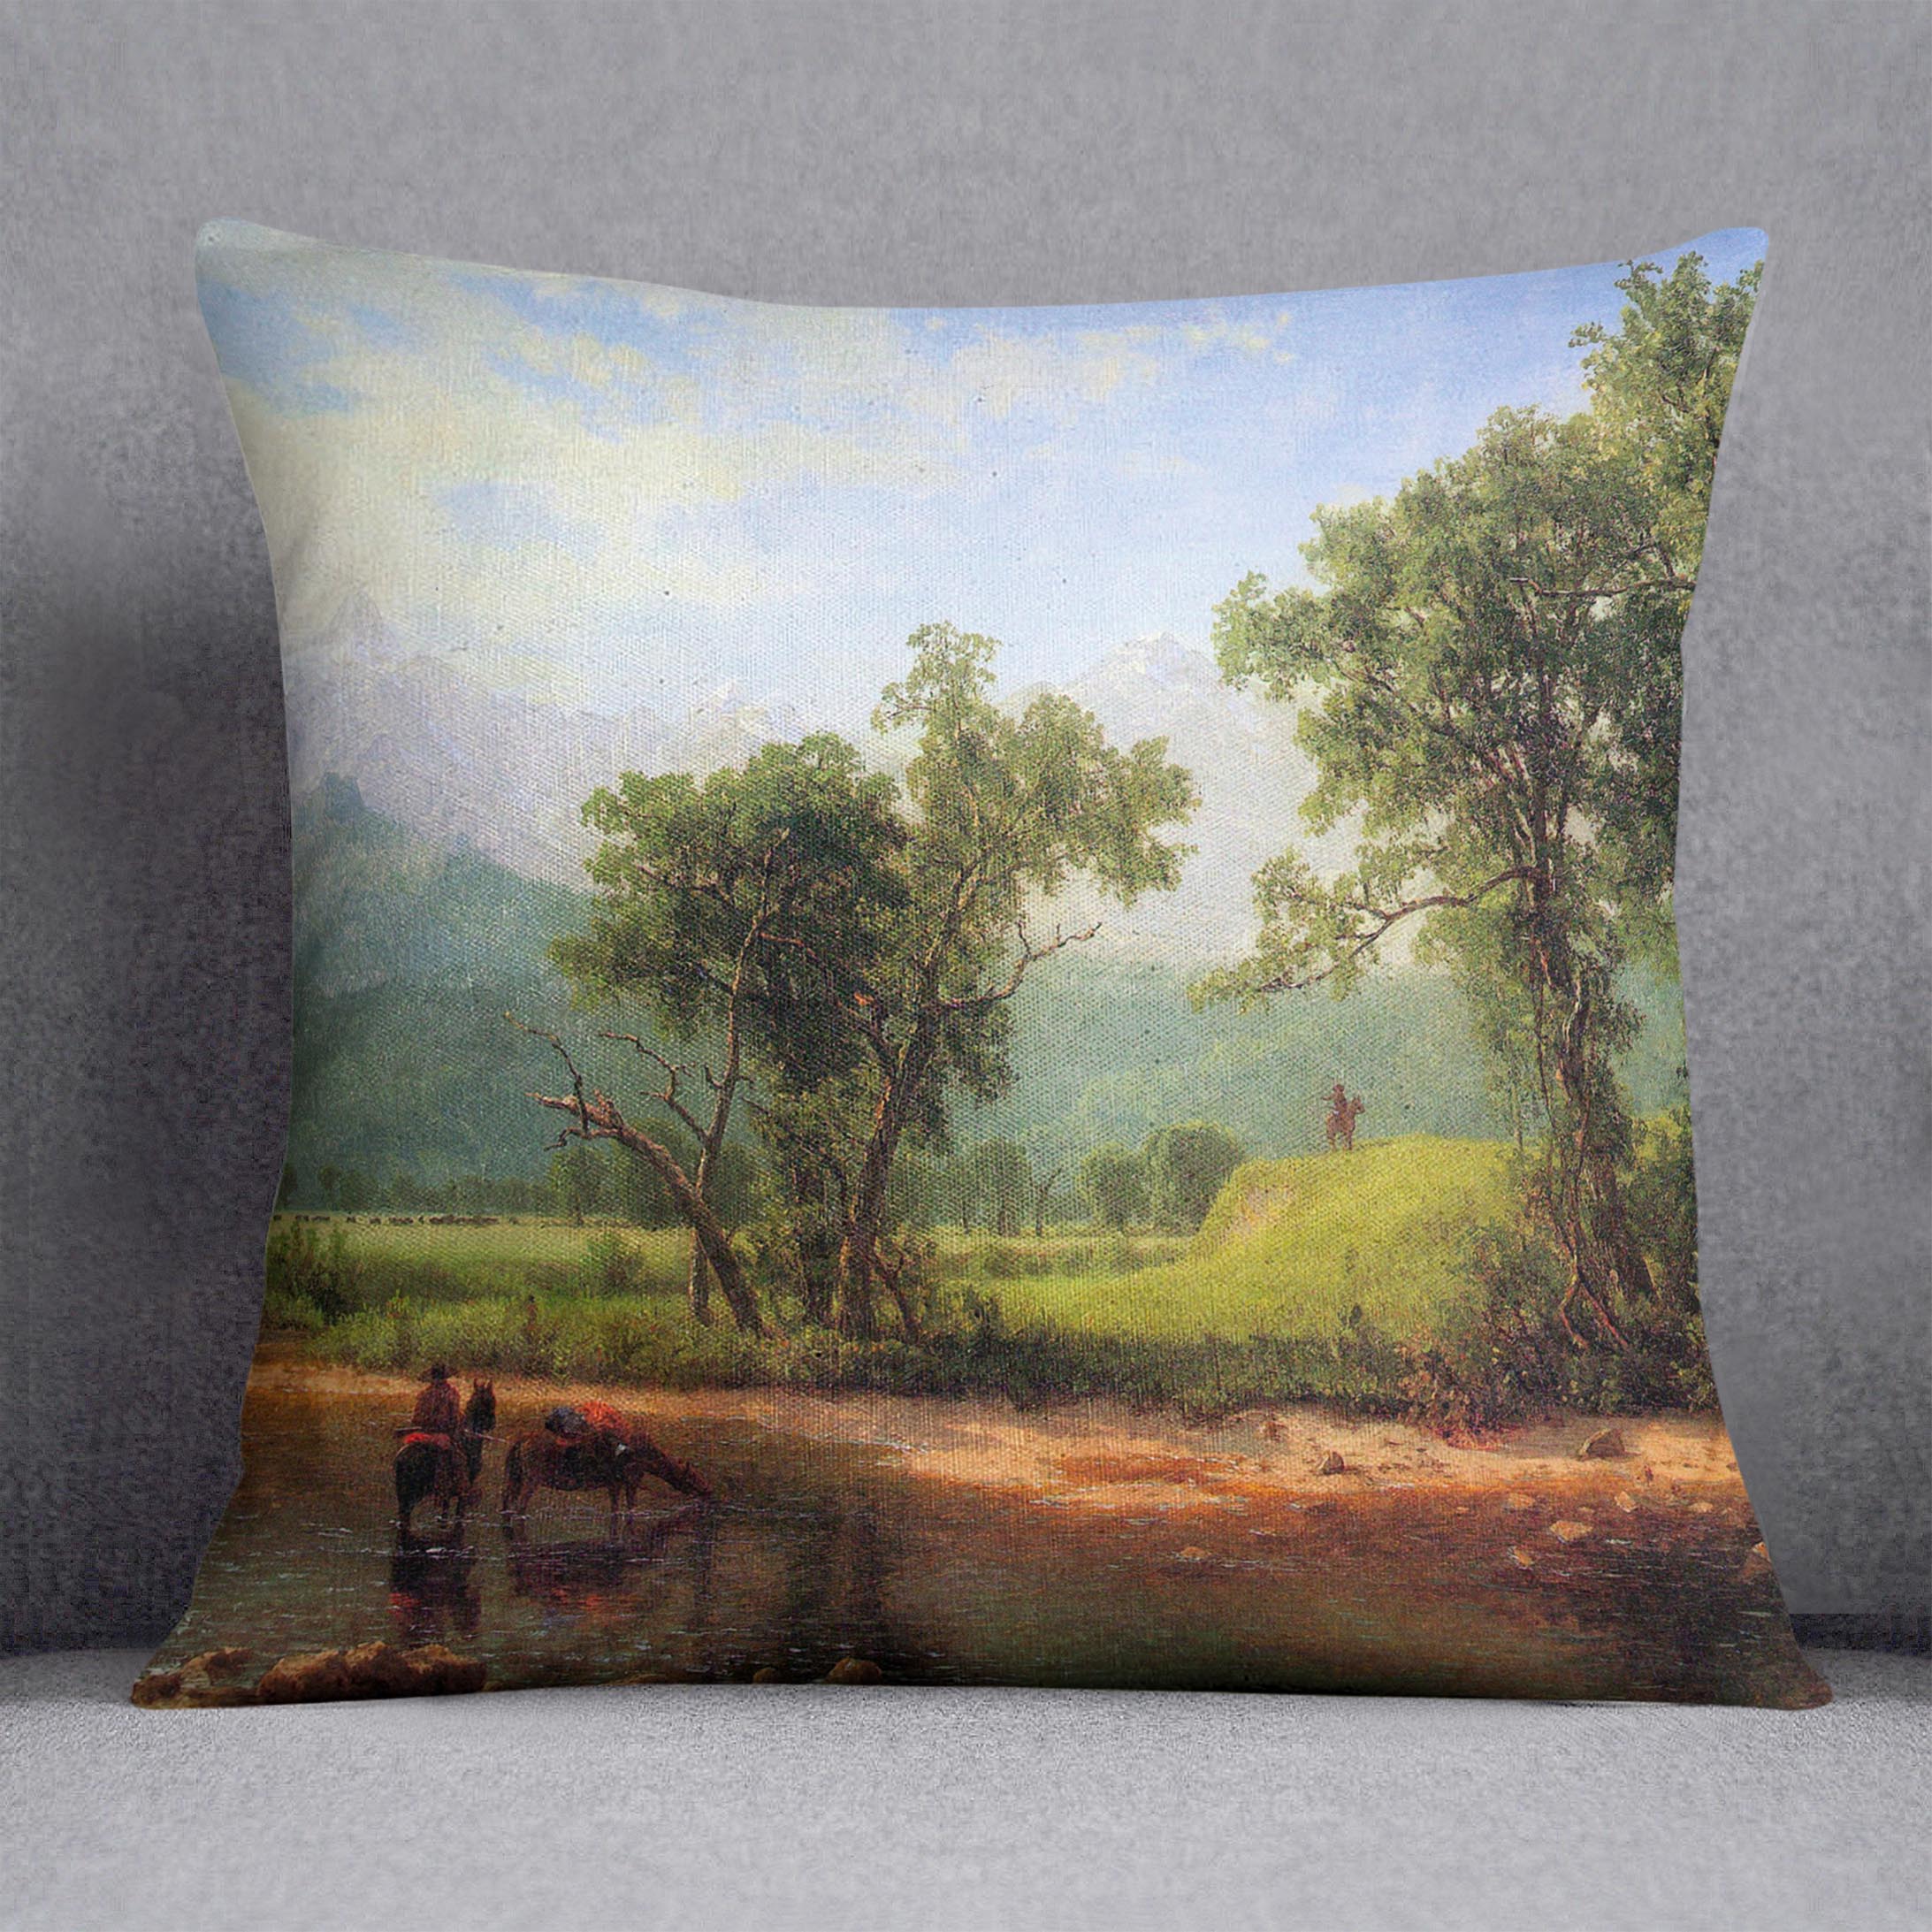 Wind River Mountains landscape in Wyoming by Bierstadt Cushion - Canvas Art Rocks - 1